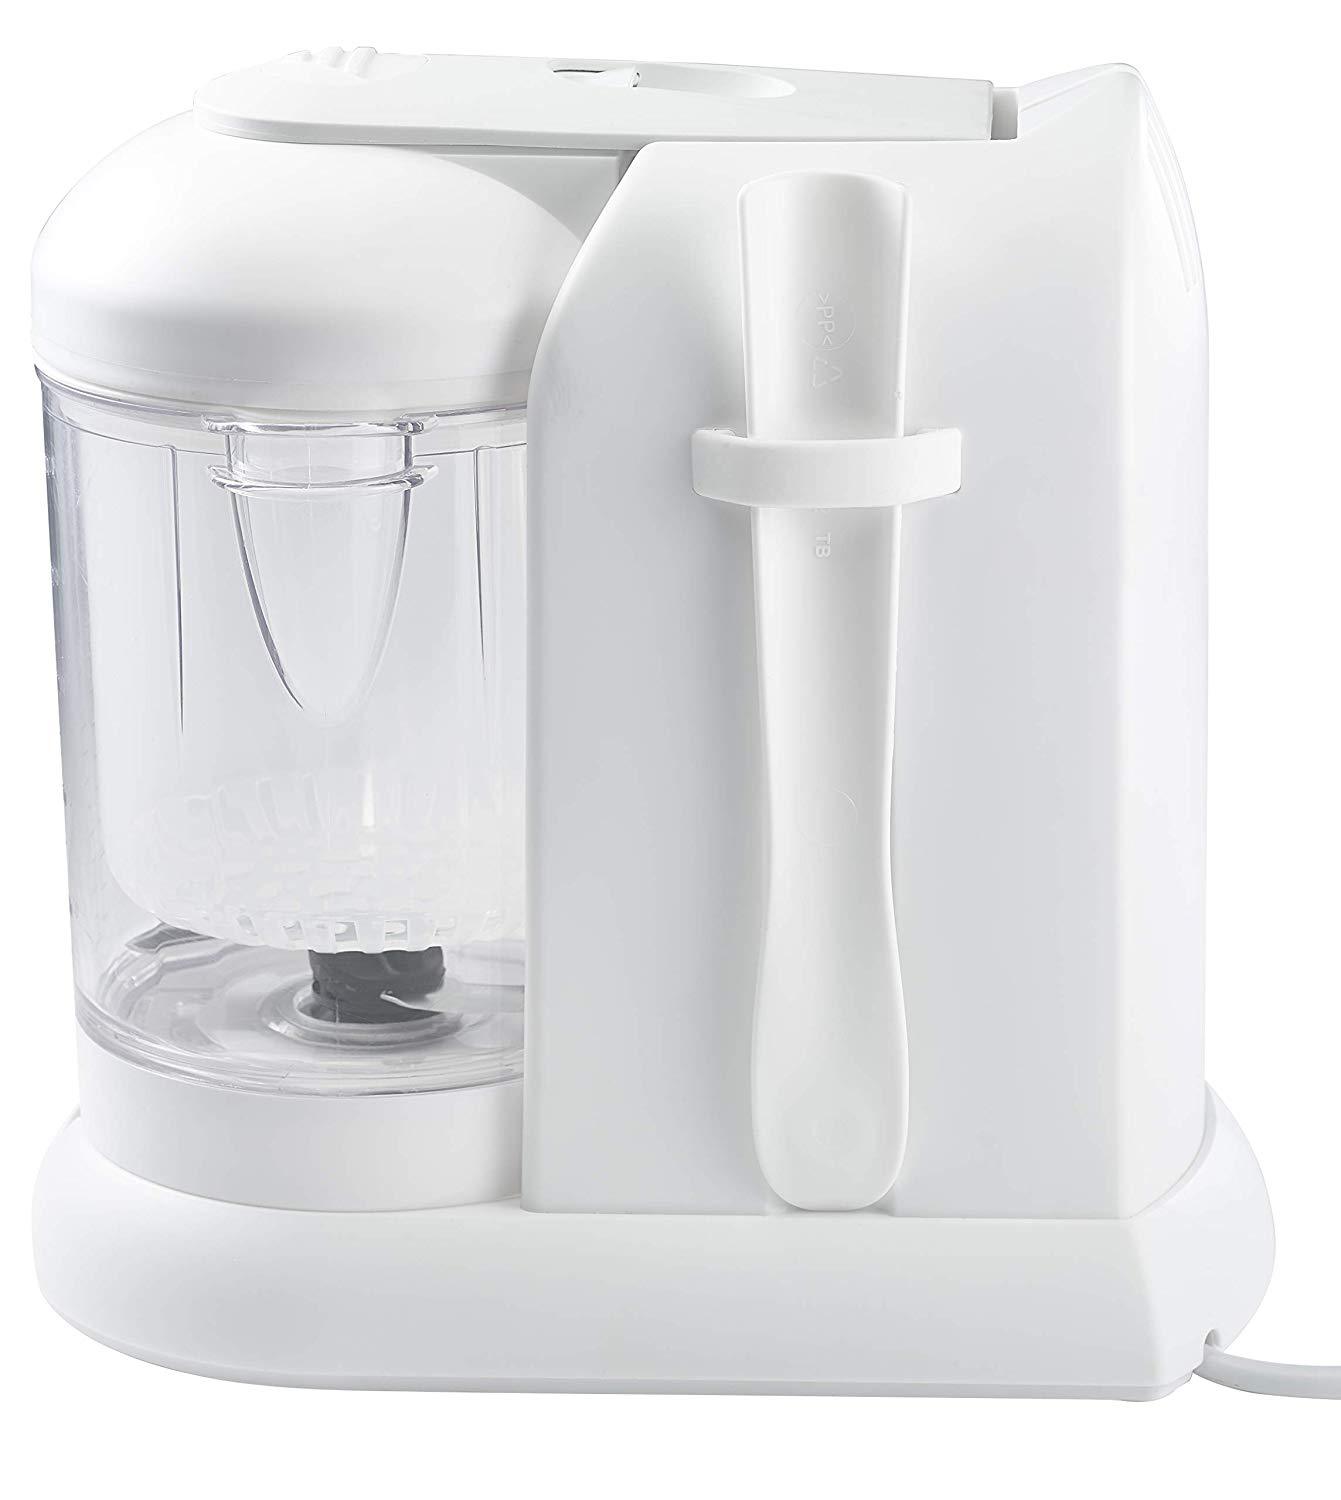 Beaba Babycook® Branco/Cinza Anne Claire Baby Store 